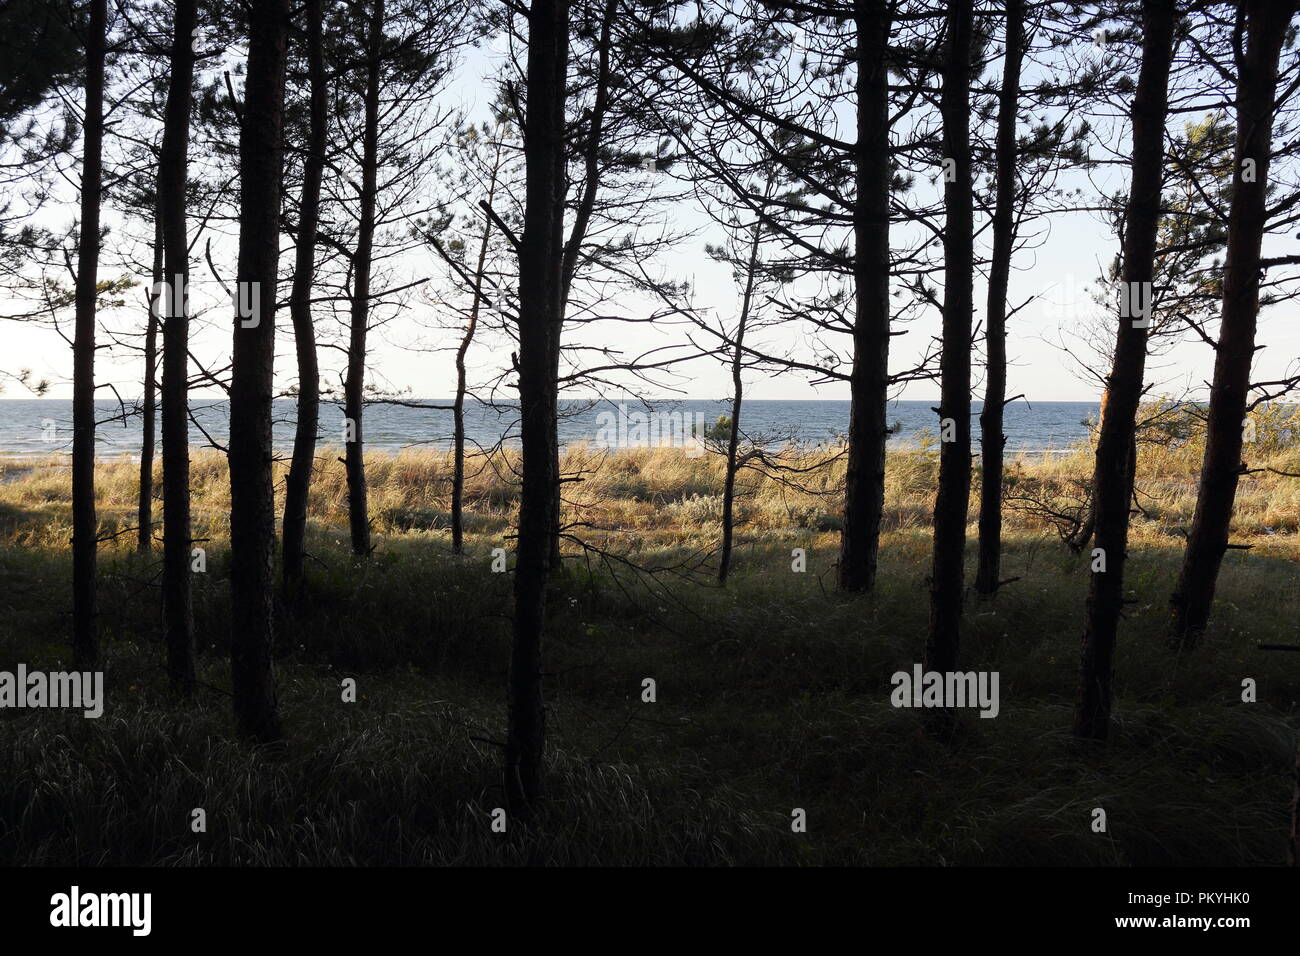 Sea, sky, beach grass and forest landscape in September, just before sunset Stock Photo